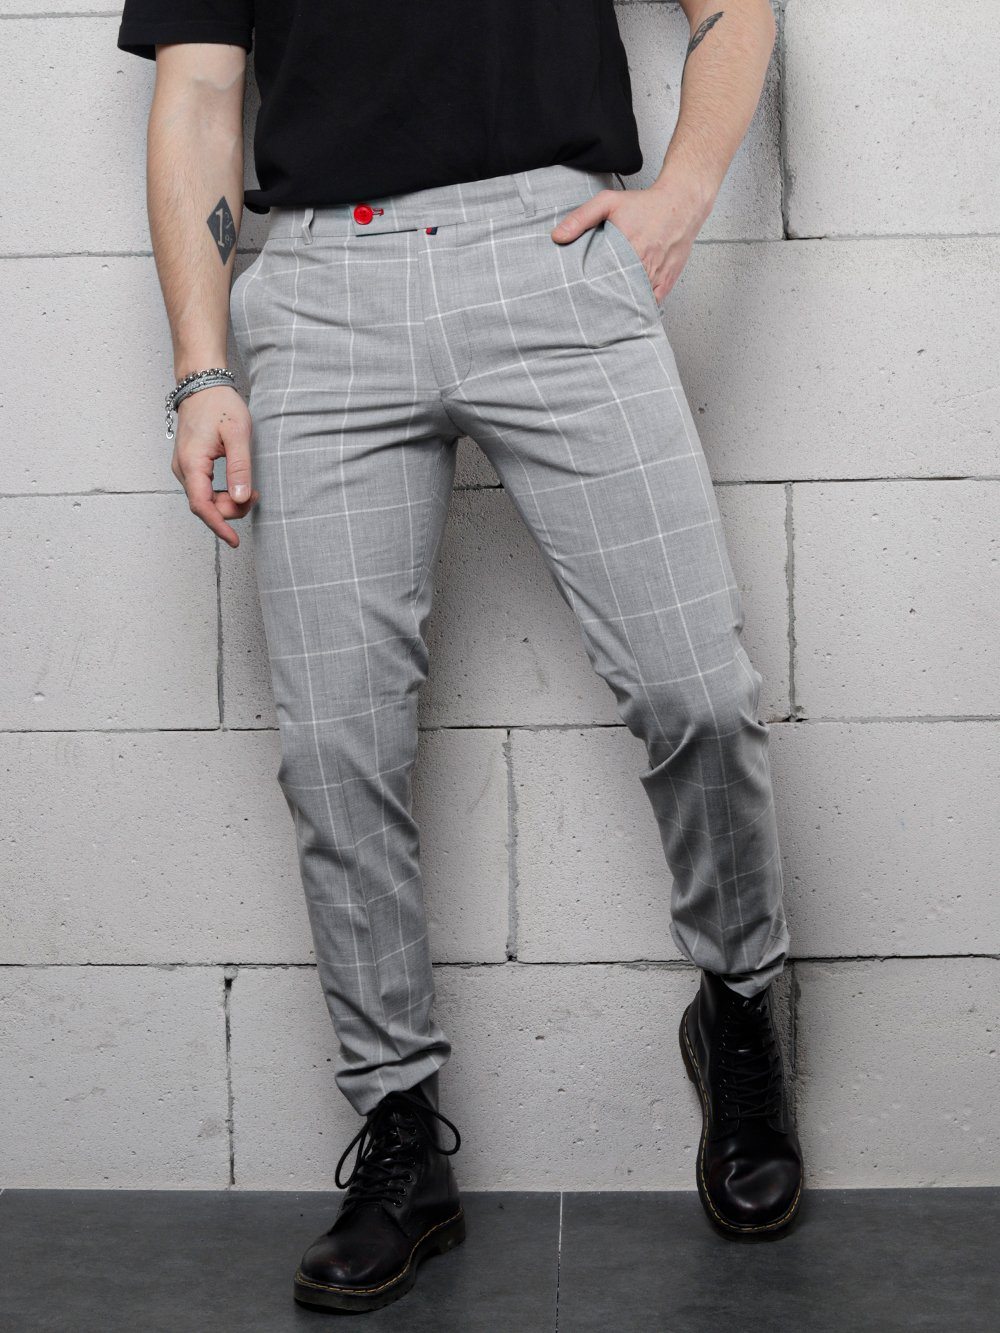 A man in a t-shirt and black pants is leaning against a wall wearing ICED AMERICANO PANTS.